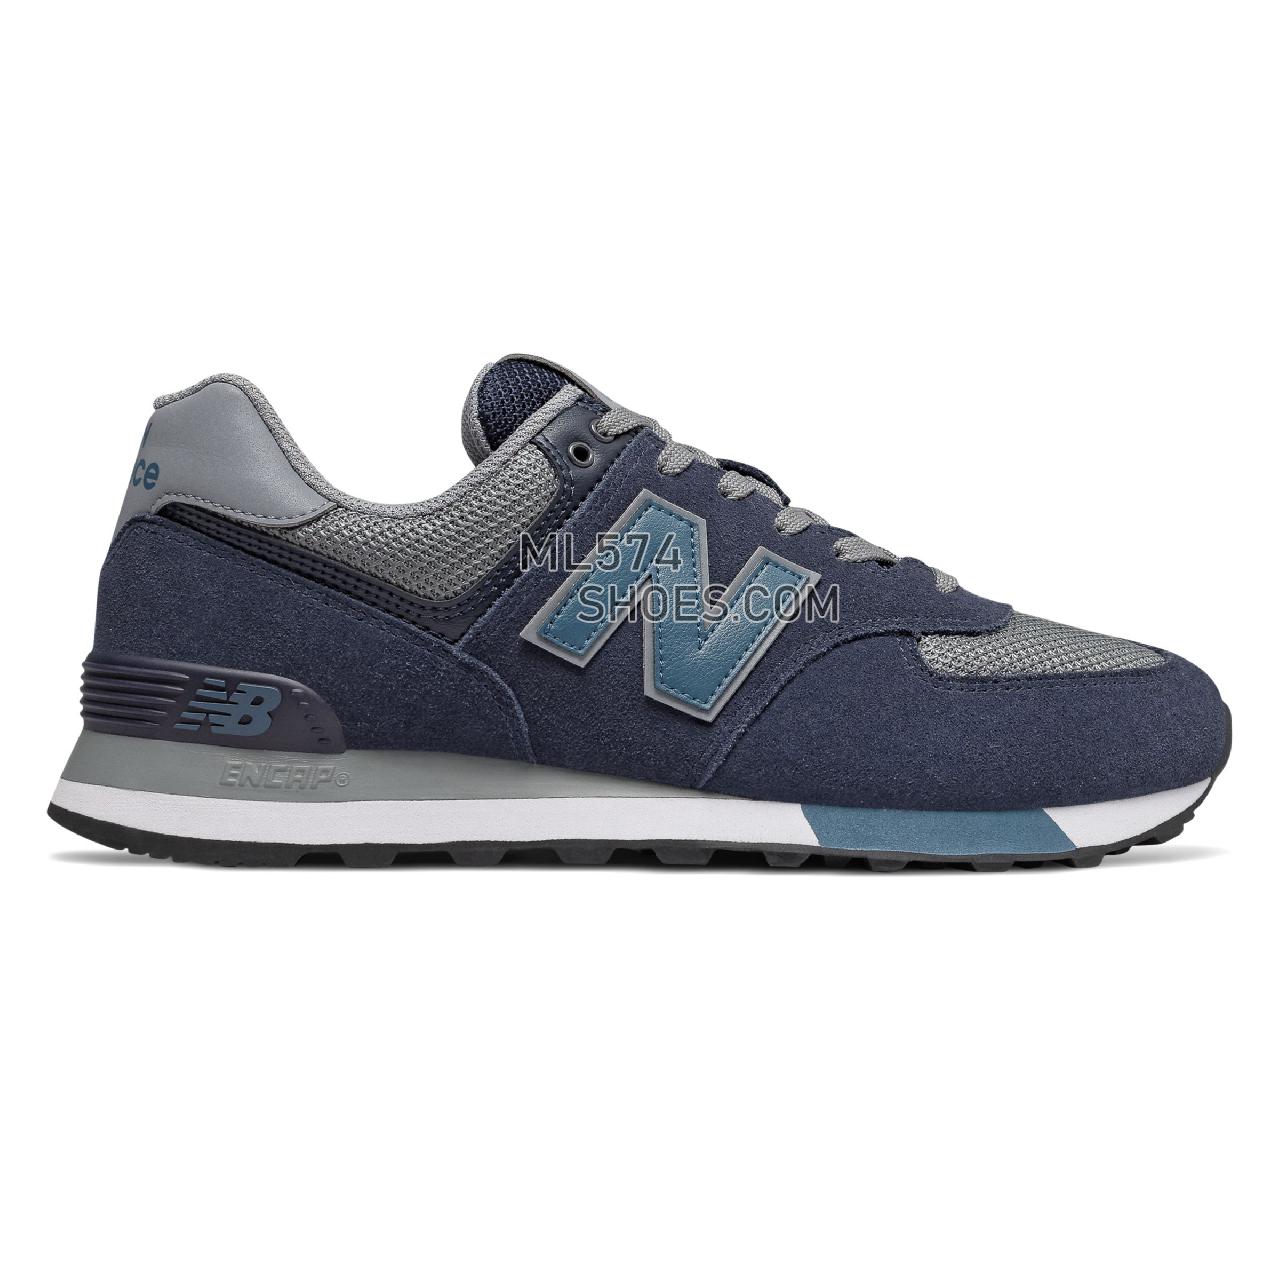 New Balance 574 - Men's Classic Sneakers - Pigment with Gunmetal - ML574FND